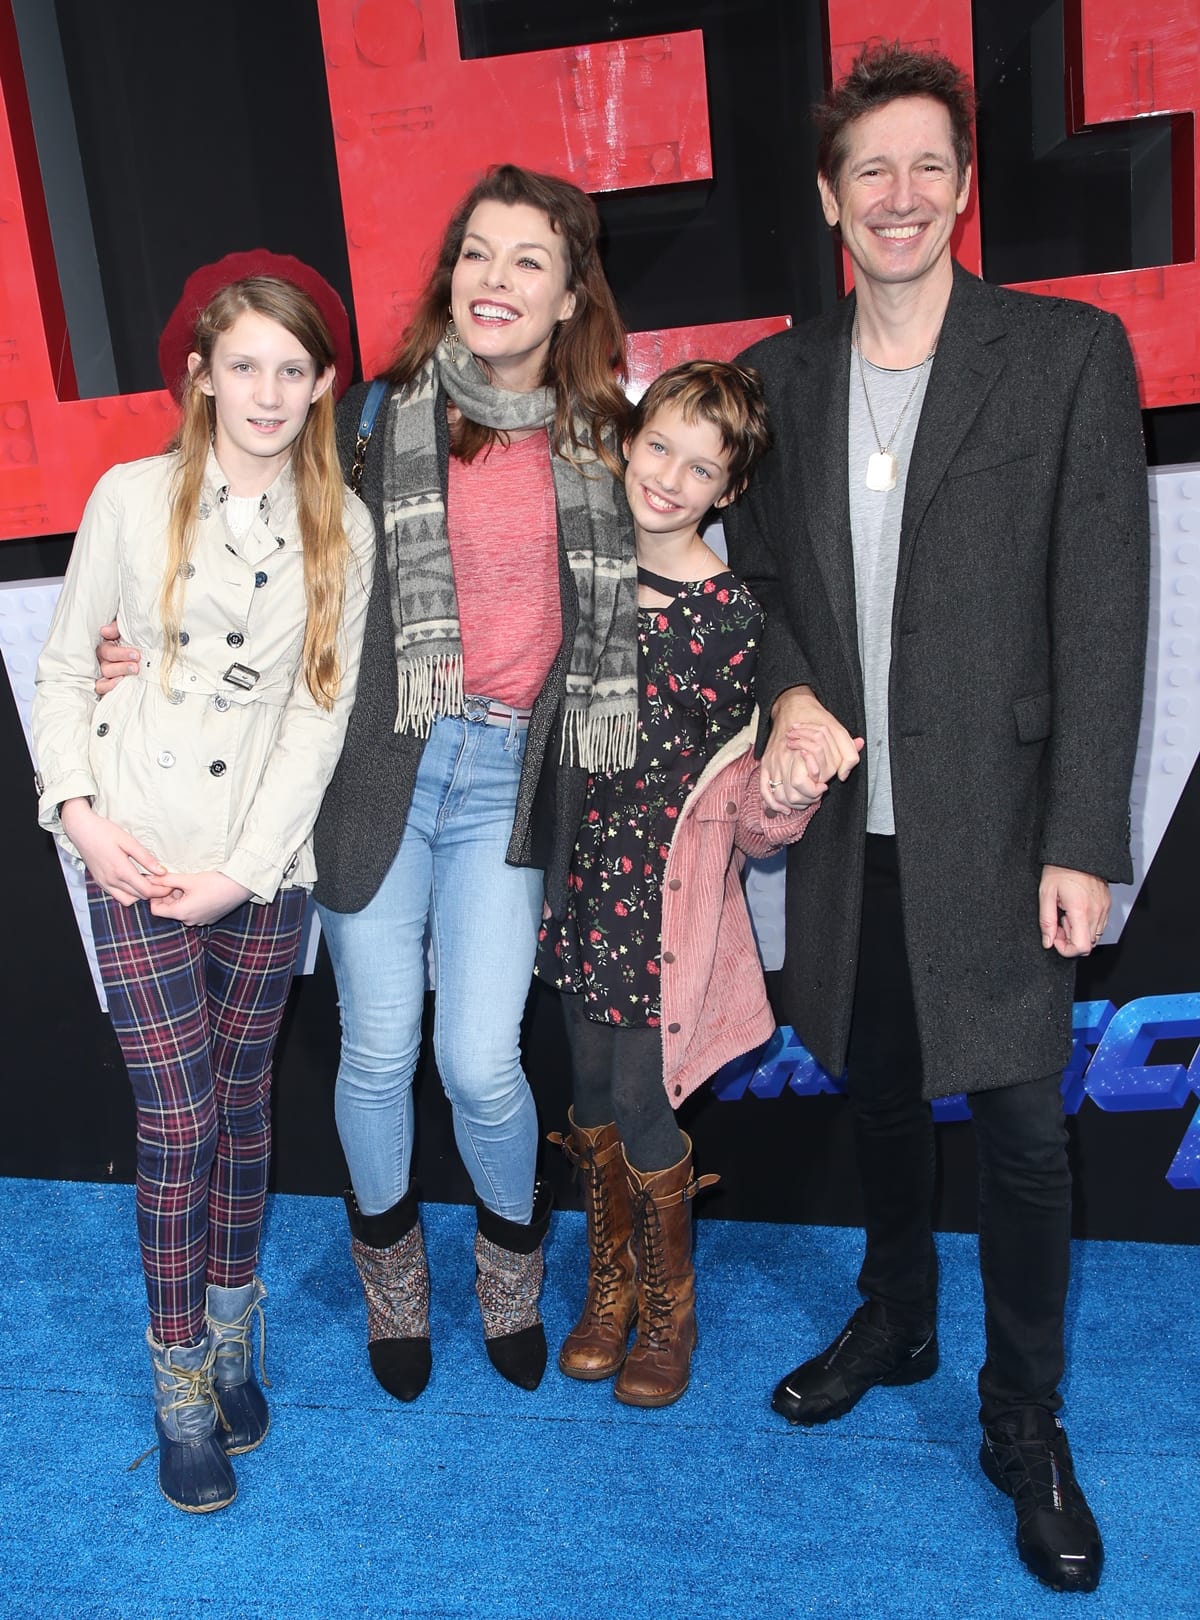 Milla Jovovich, Paul W. S. Anderson, daughter Ever Anderson, and a young guest attend the premiere of The Lego Movie 2: The Second Part